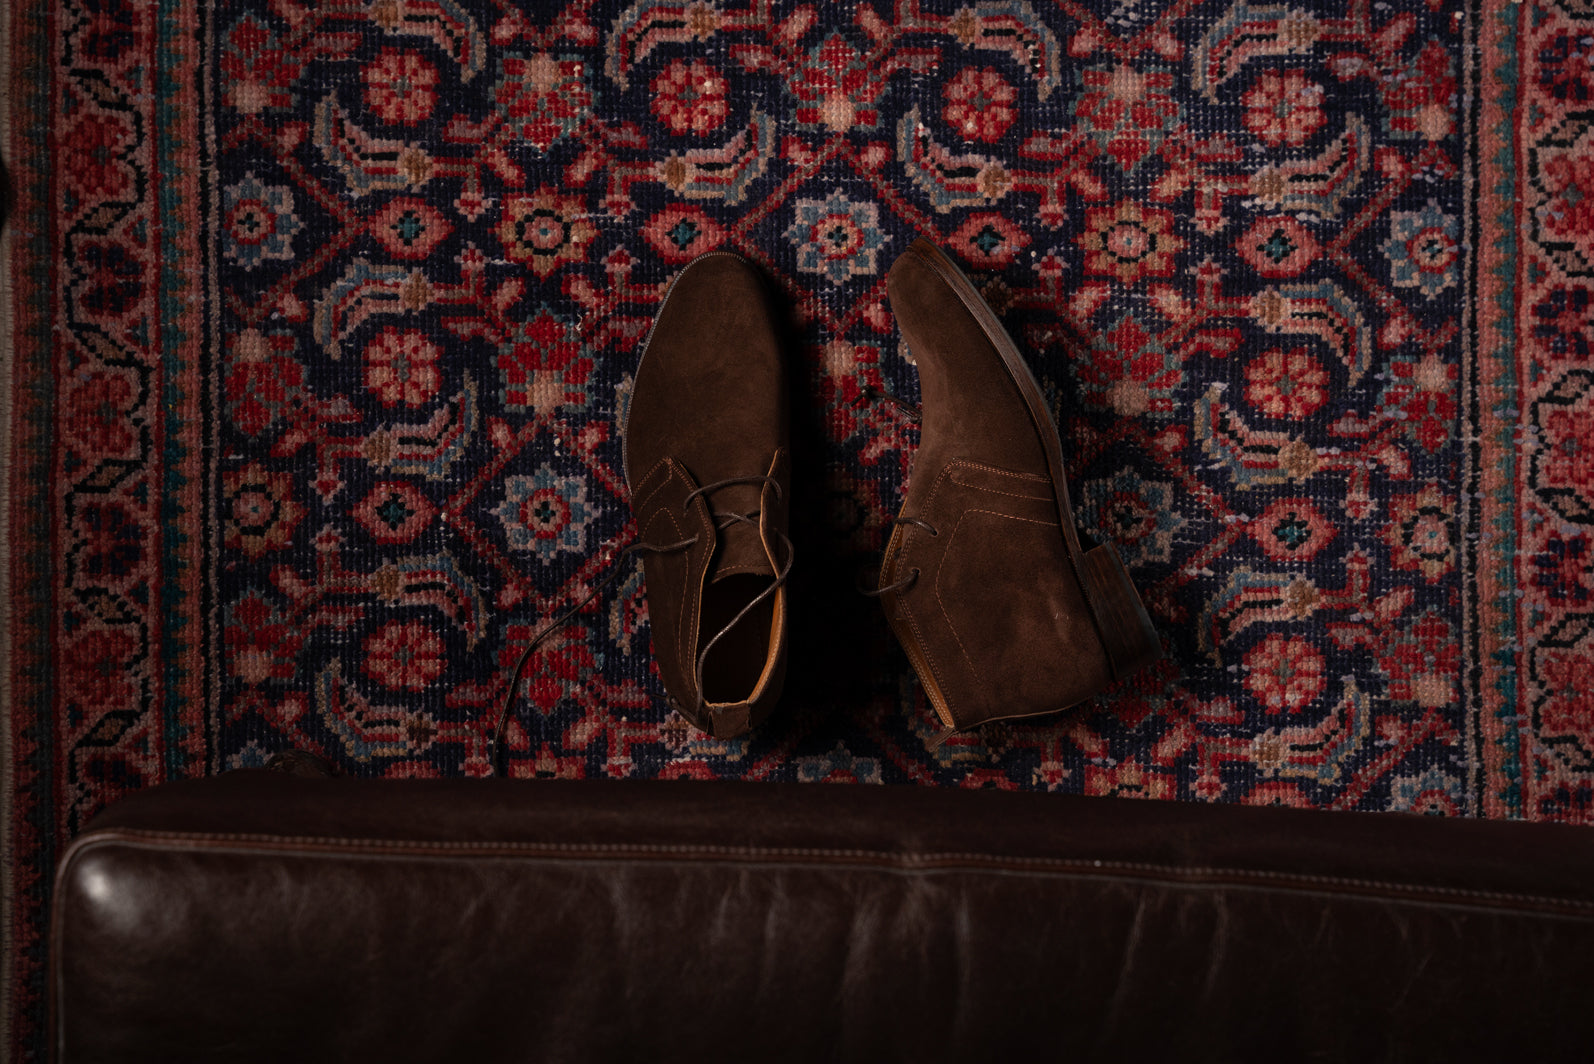 Bosphorus Leather Chukka Boots - Gulf Suede Brown